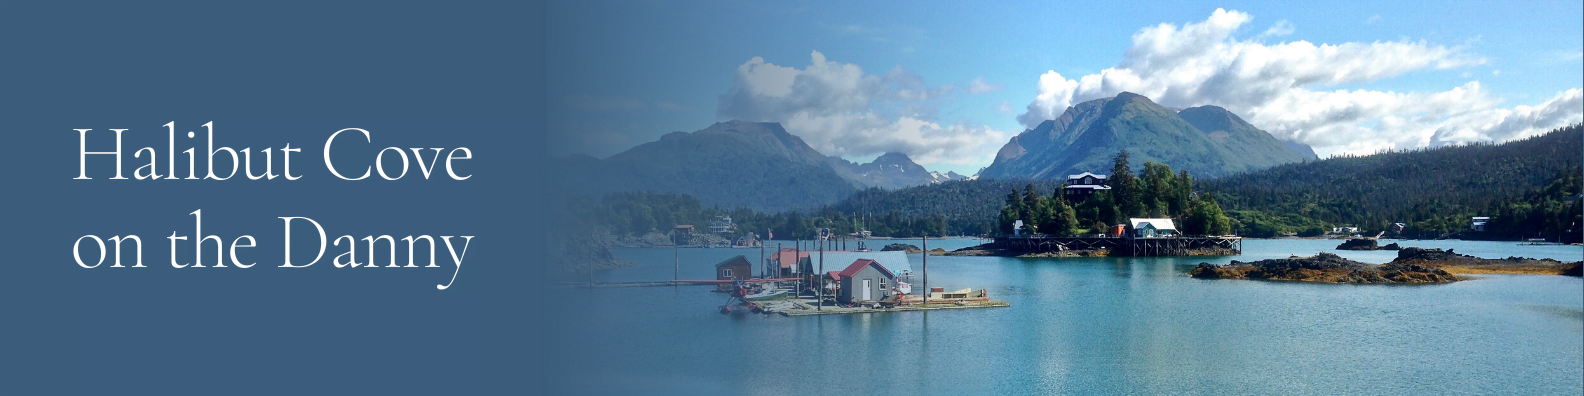 Things to Do - Halibut Cove